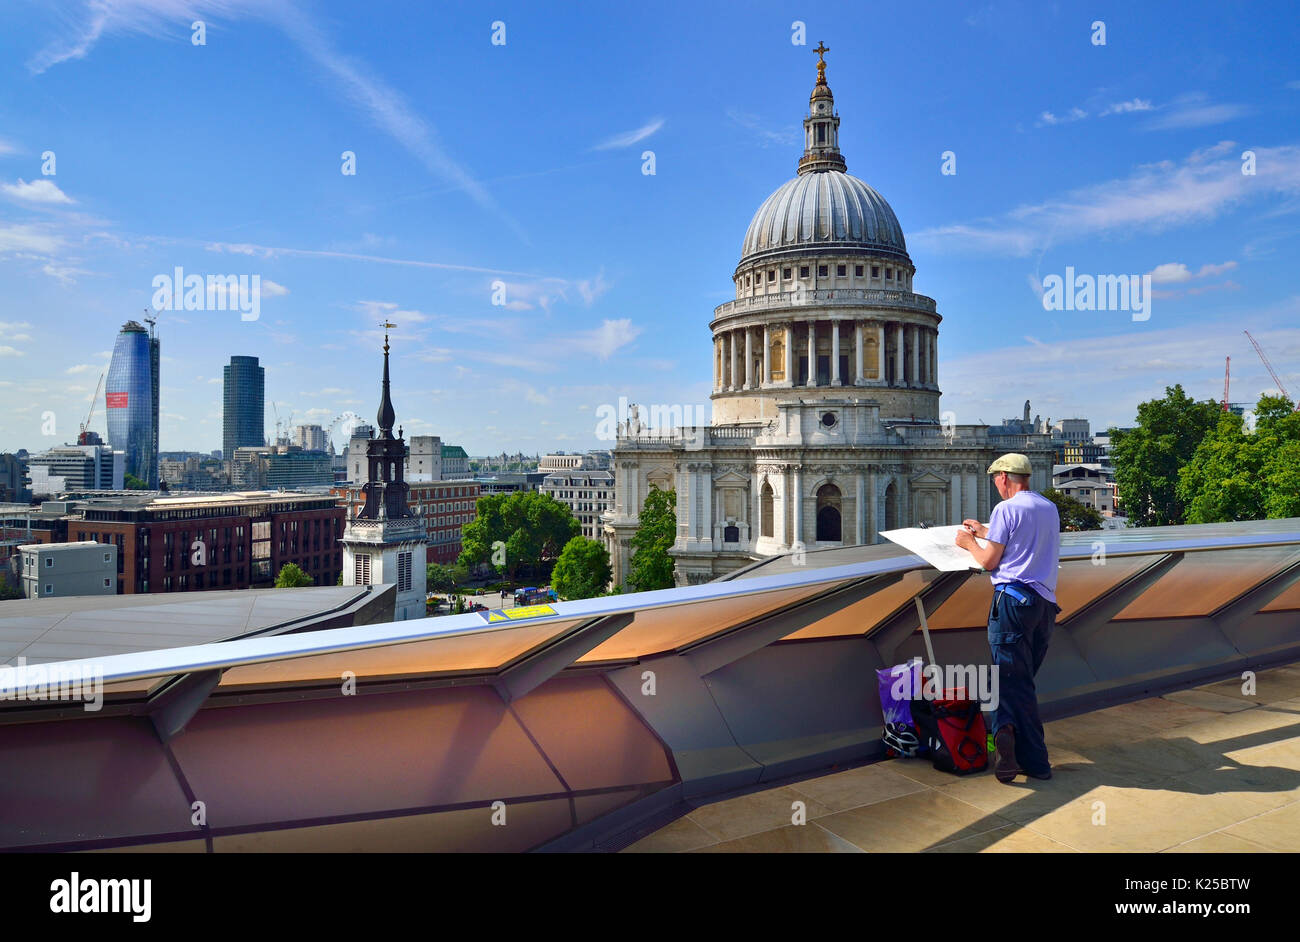 London, England, UK. St Paul's Cathedral seen from the public rooftop terrace of One New Change - artist drawing the cathedral Stock Photo